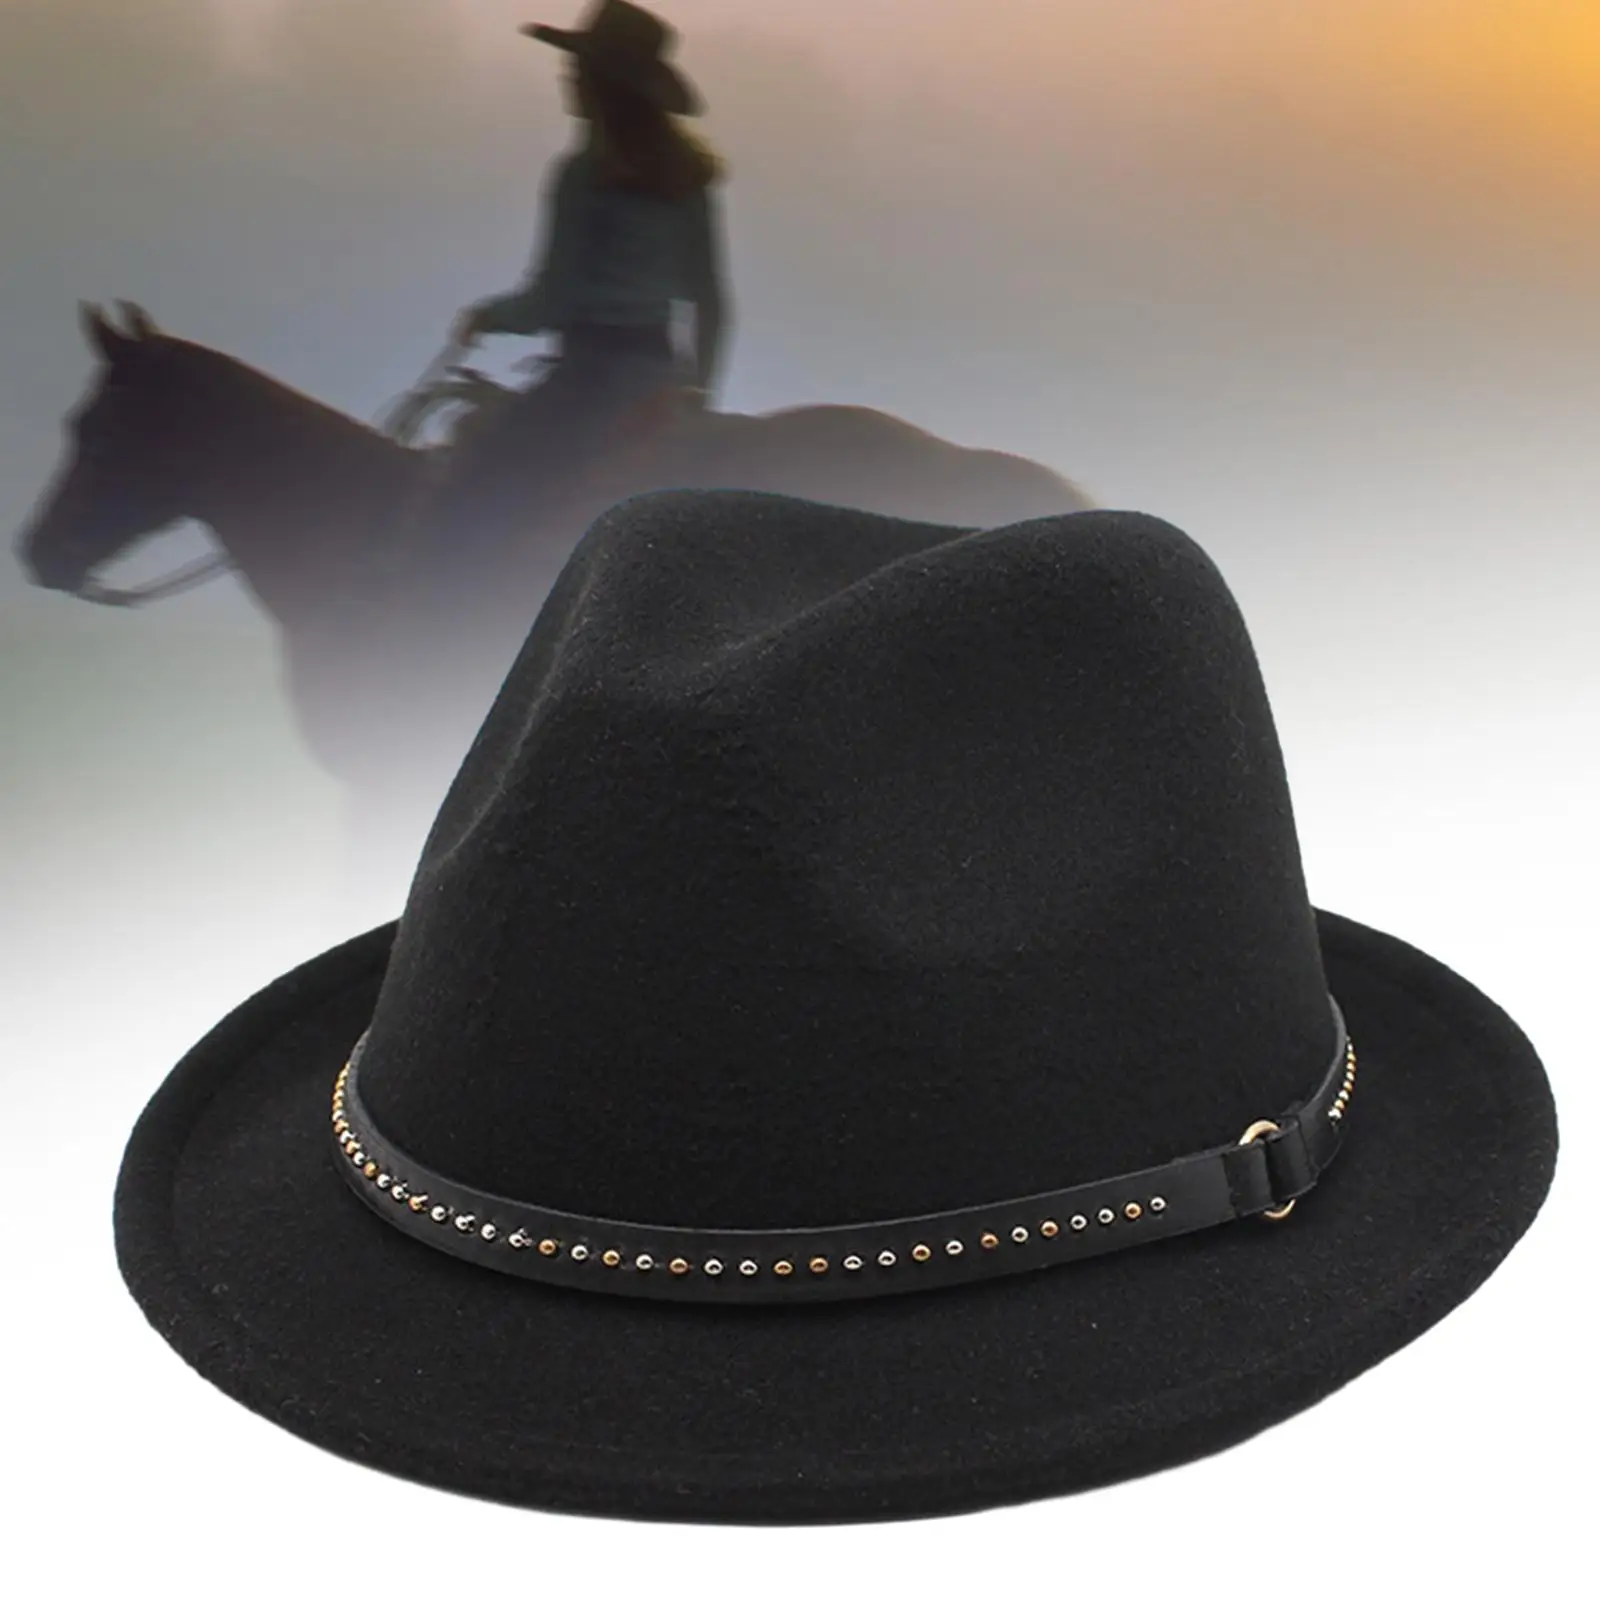 Fedora Hat Cosplay Western Cowboy Hat Decorated Classic Short Brim for Fancy Dress Cocktail Party Stage Performance Outdoor